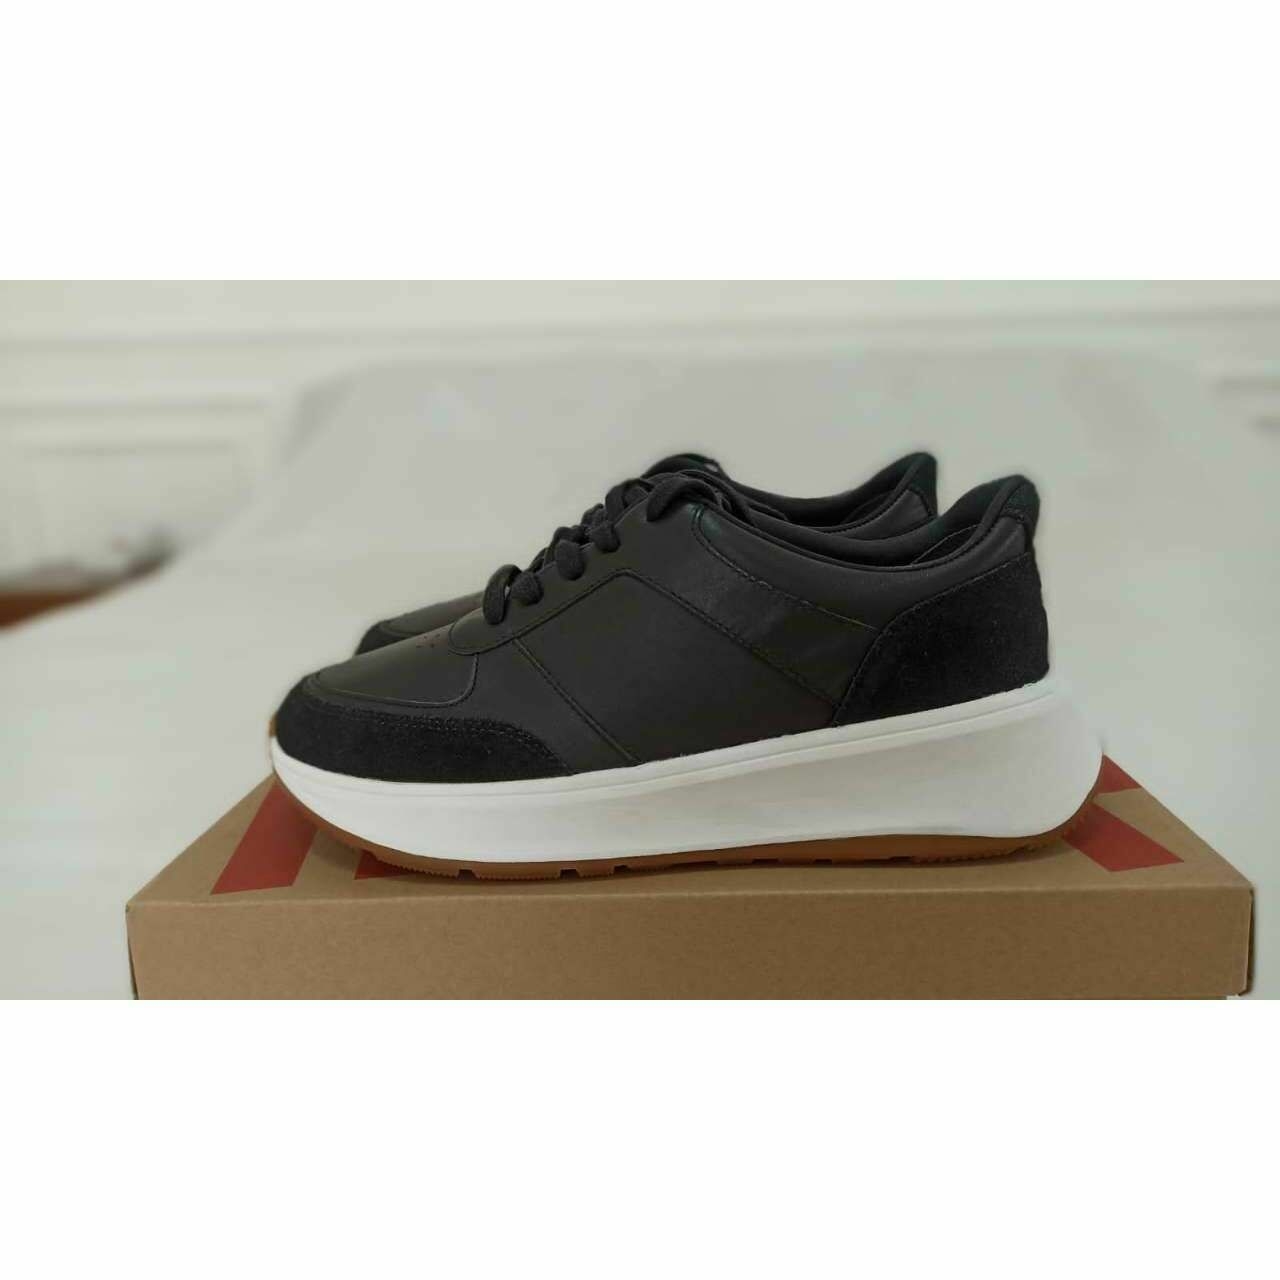 Fitflop Black Sneakers